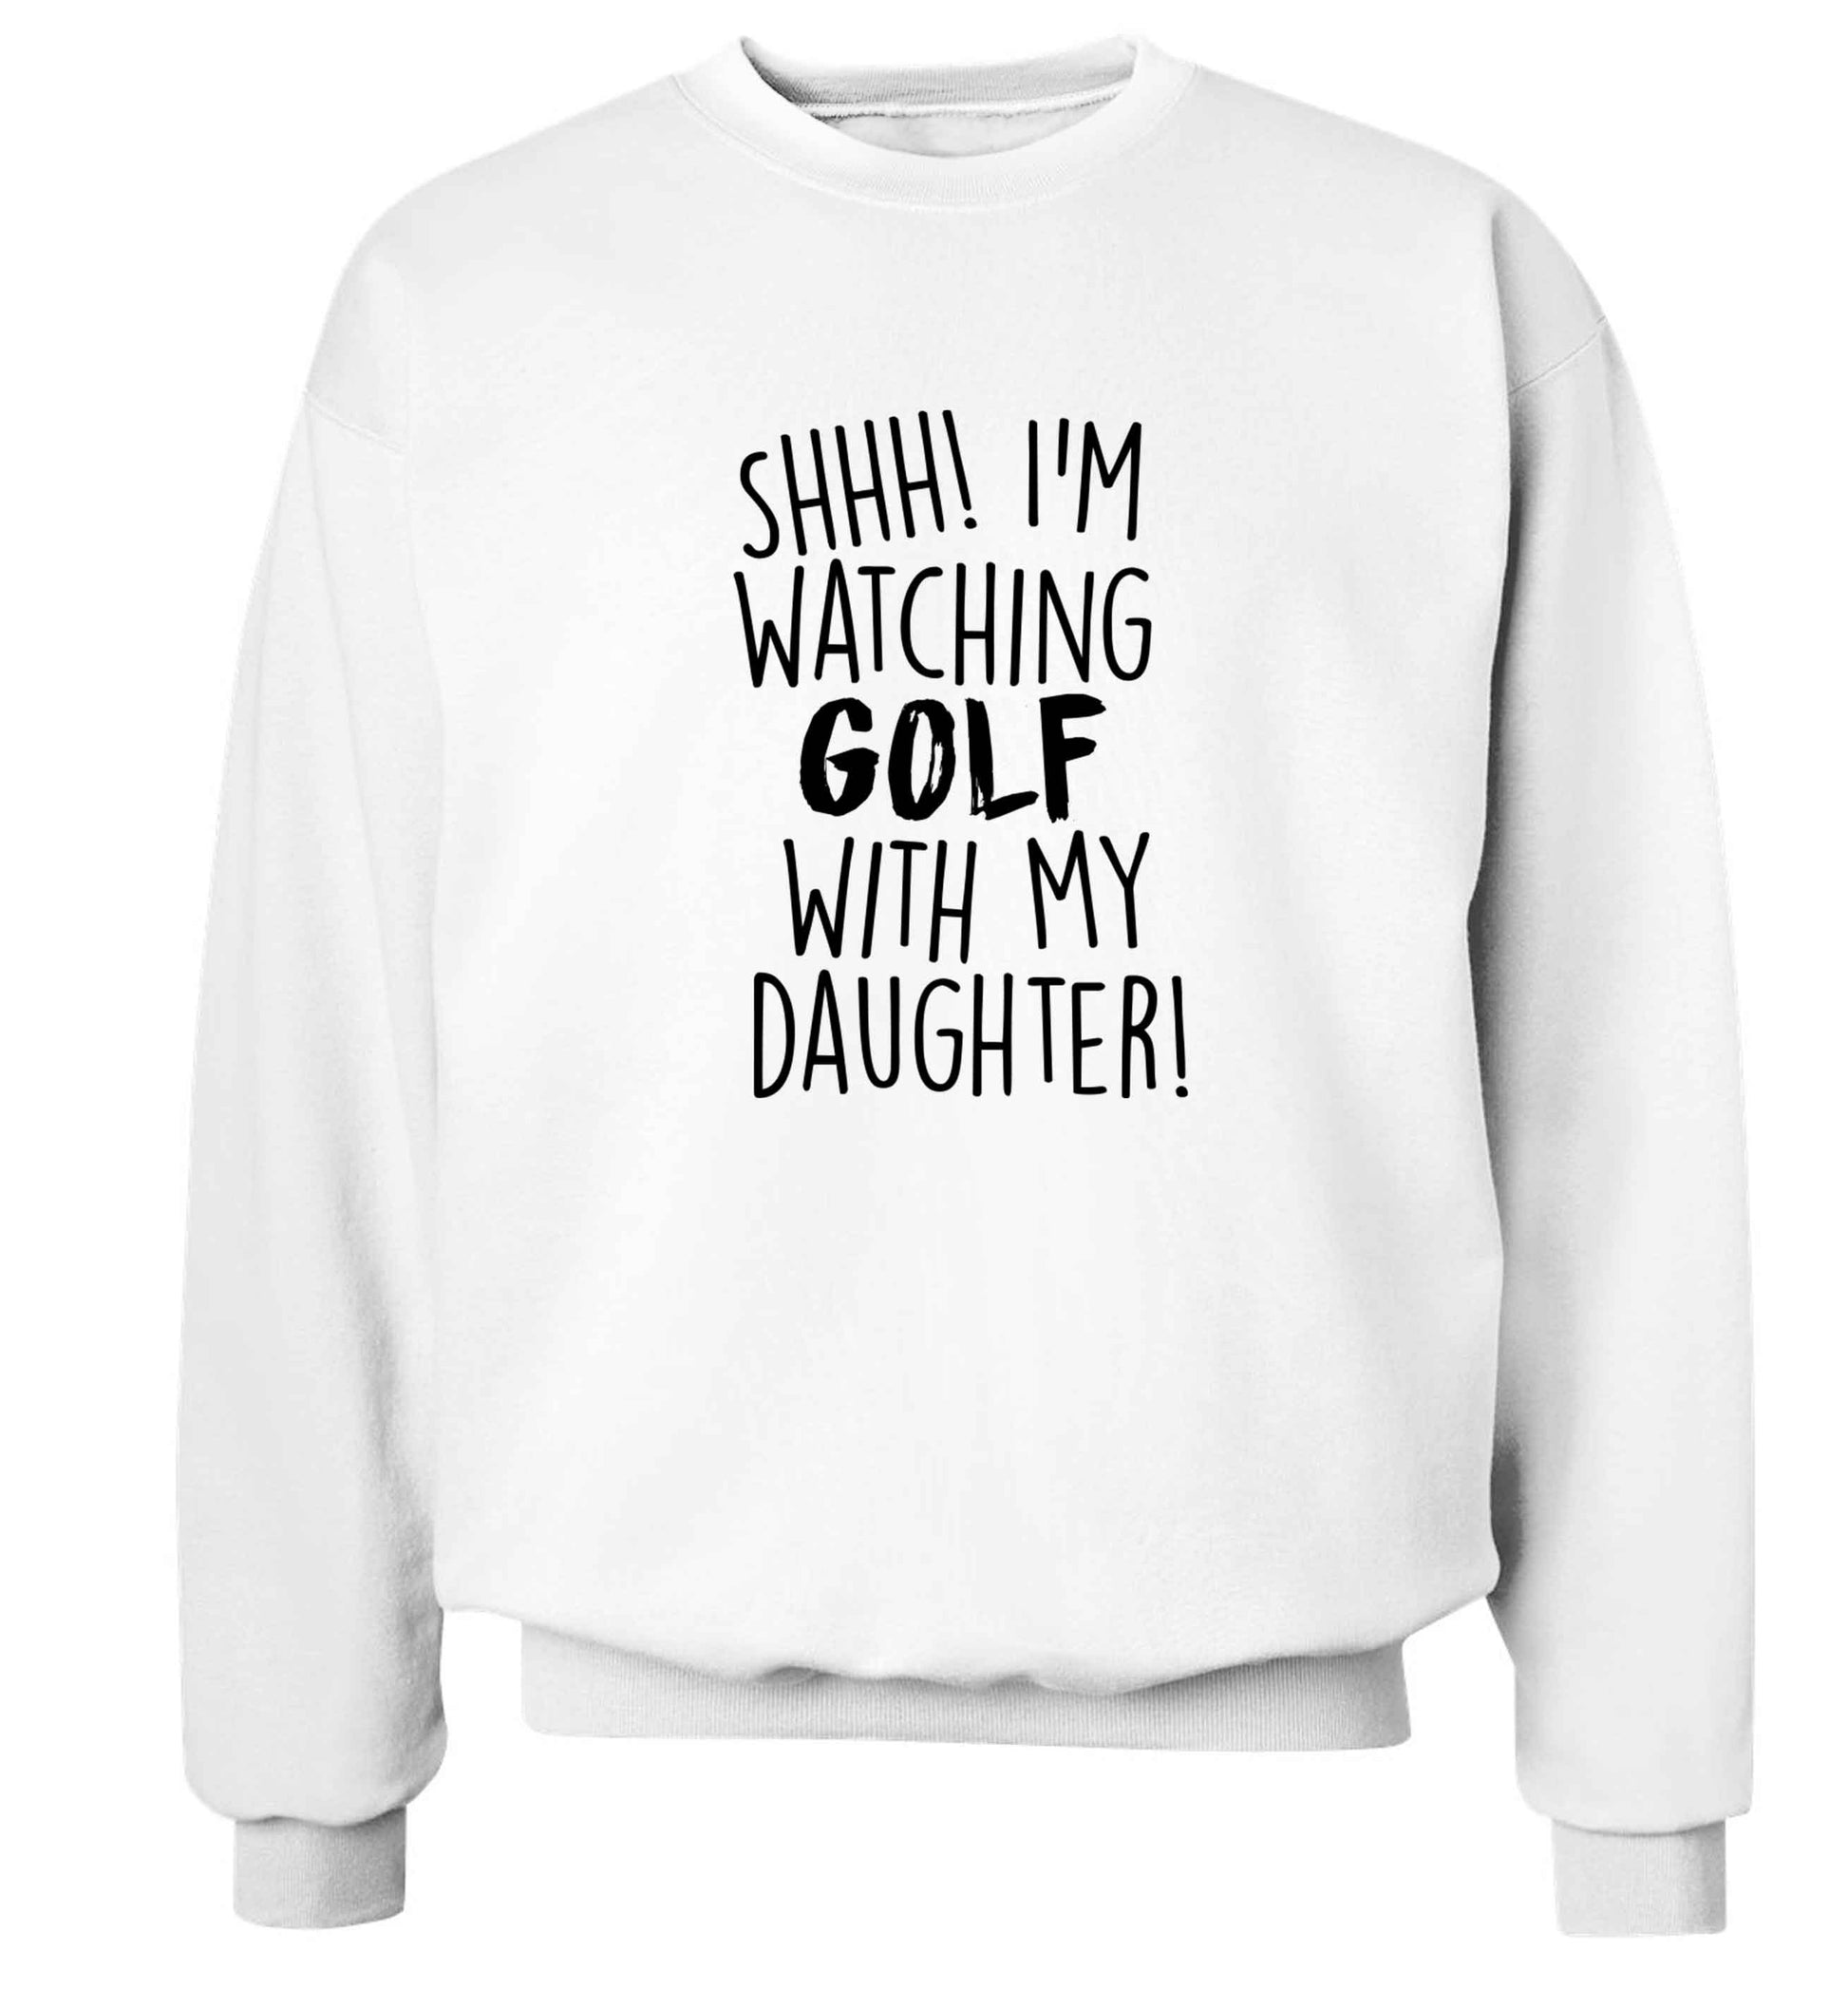 Shh I'm watching golf with my daughter Adult's unisex white Sweater 2XL